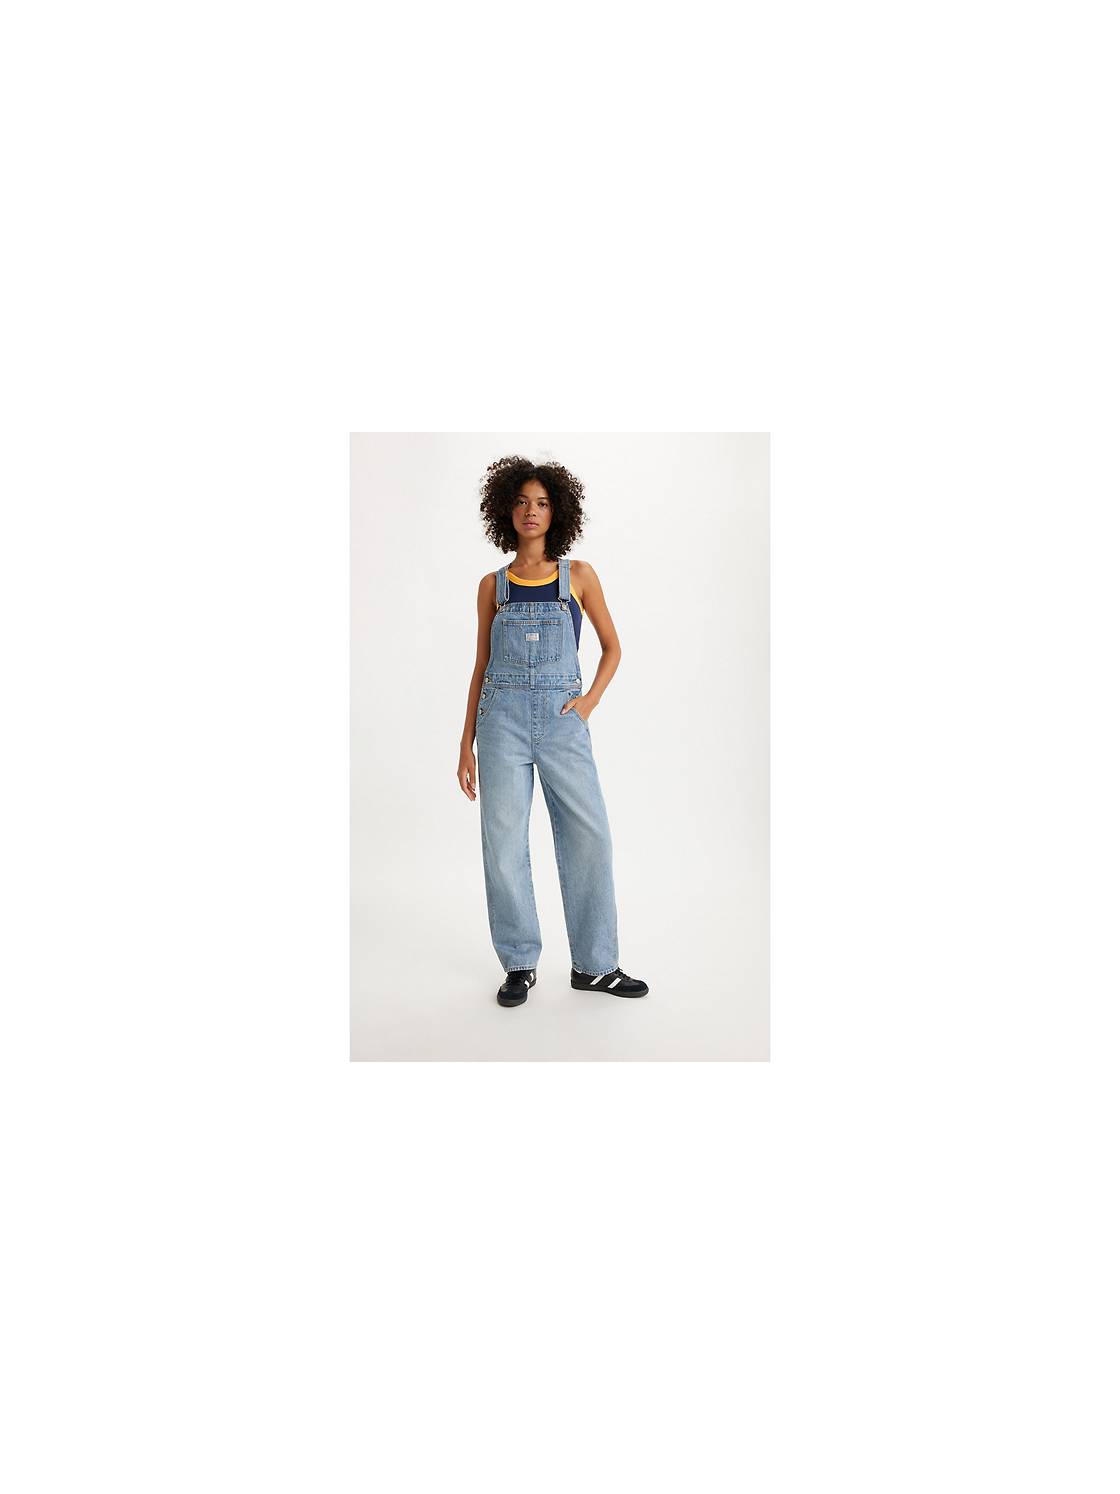 Dungarees and Jumpsuits for Women, Shorts & Denim